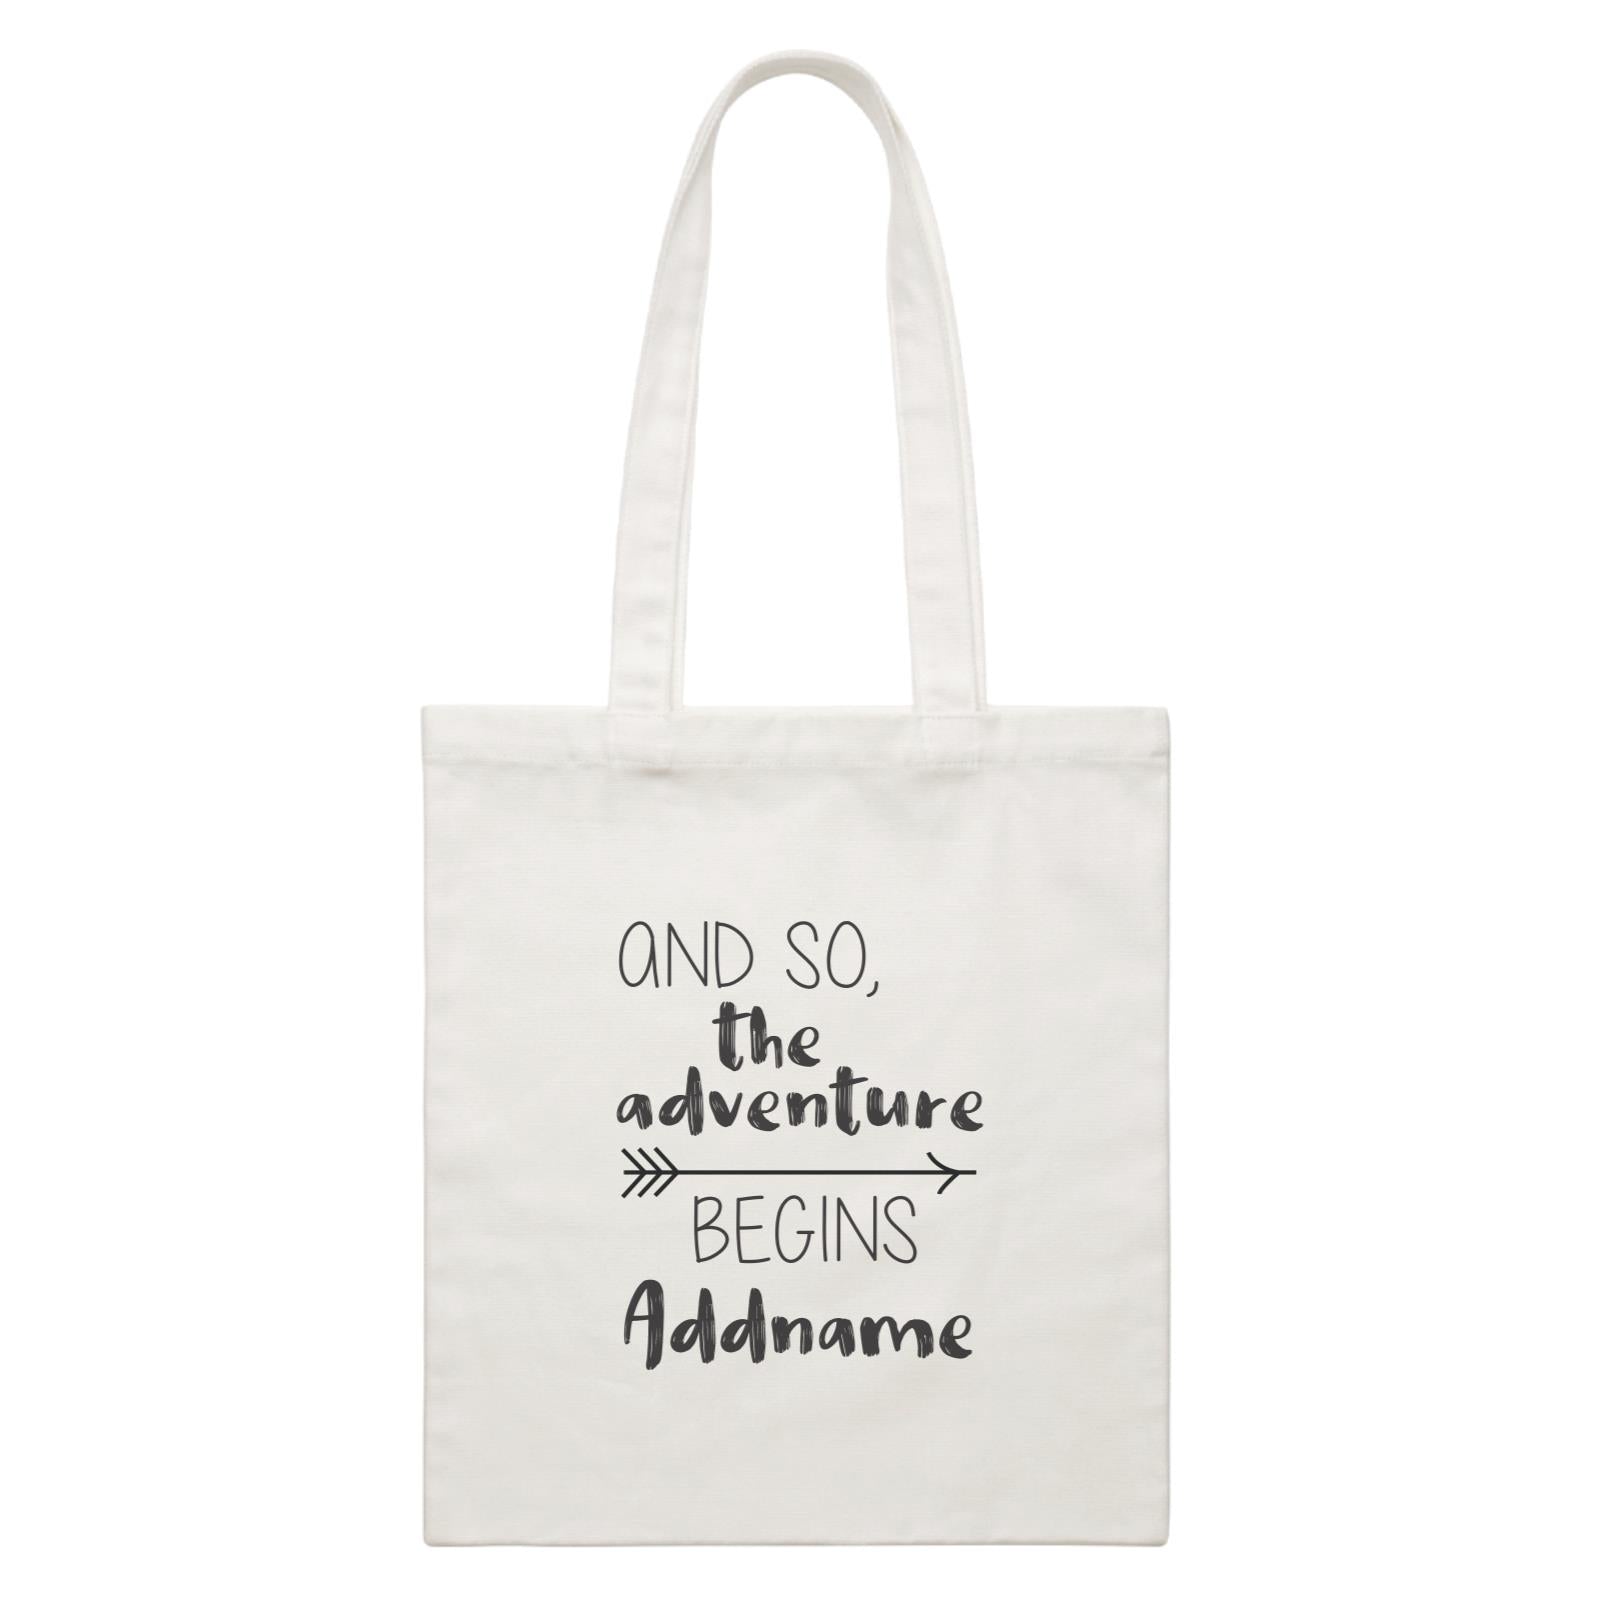 Travel Quotes And So The Adventure Begins Addname White Canvas Bag